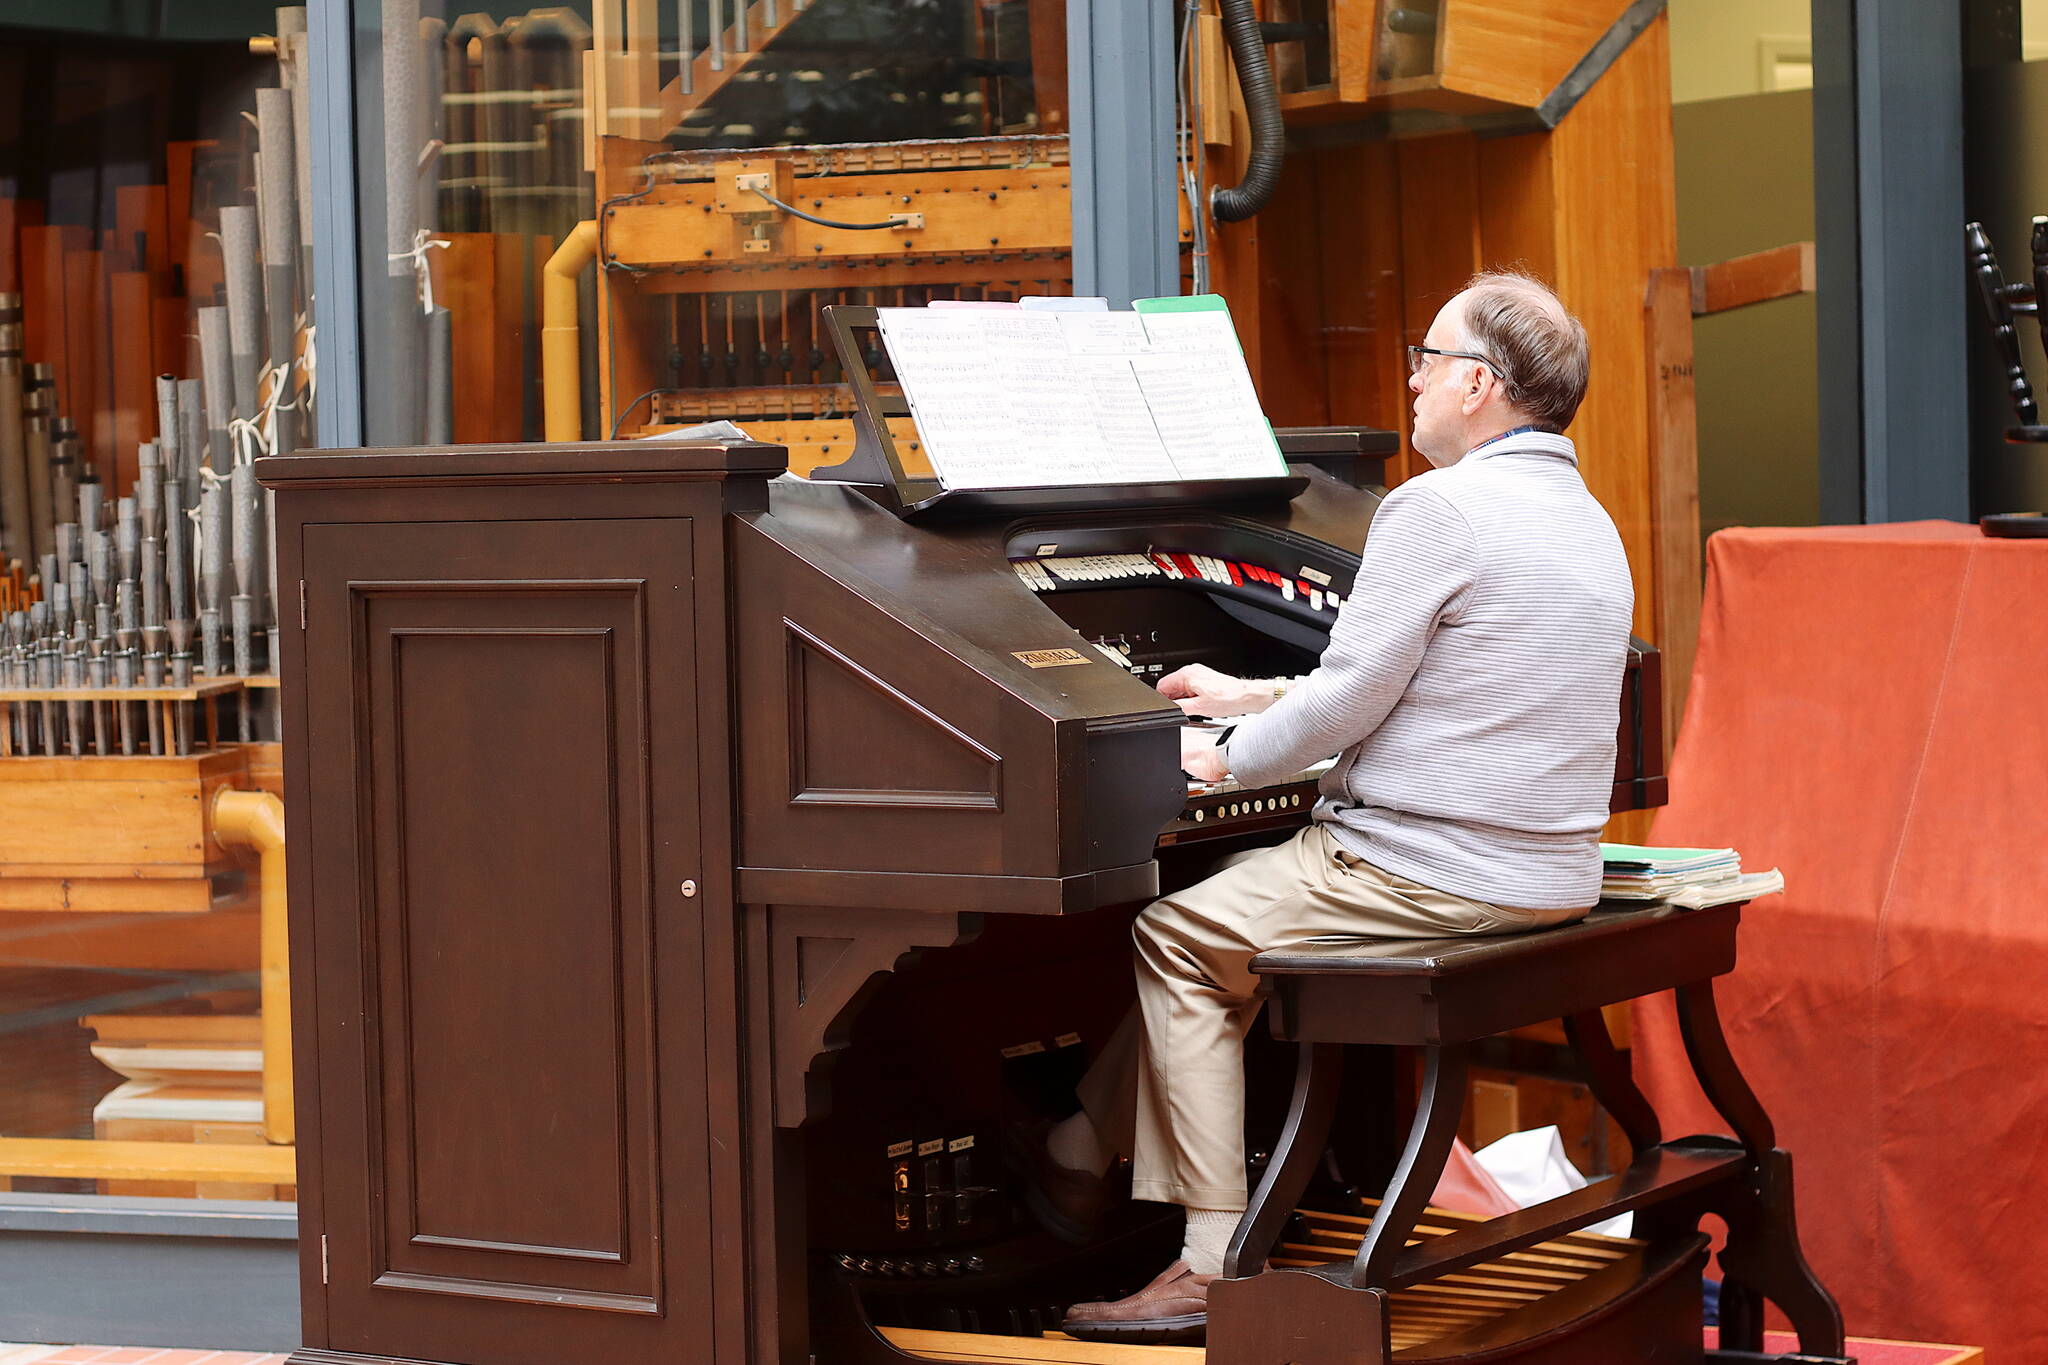 J. Allan MacKinnon performs his first concert in more than three years on the 1928 Kimball Theatre Pipe Organ in the Alaska State Office Building during the noon hour on Friday. Weekly concerts on the instrument were a hallmark of the building for decades, but were halted in early 2020 due to the COVID-19 pandemic. The inactivity left the organ unplayable until technicians from Oregon tuned and restored the instrument the week before MacKinnon’s performance. Additional concerts are scheduled weekly through August. (Mark Sabbatini / Juneau Empire)